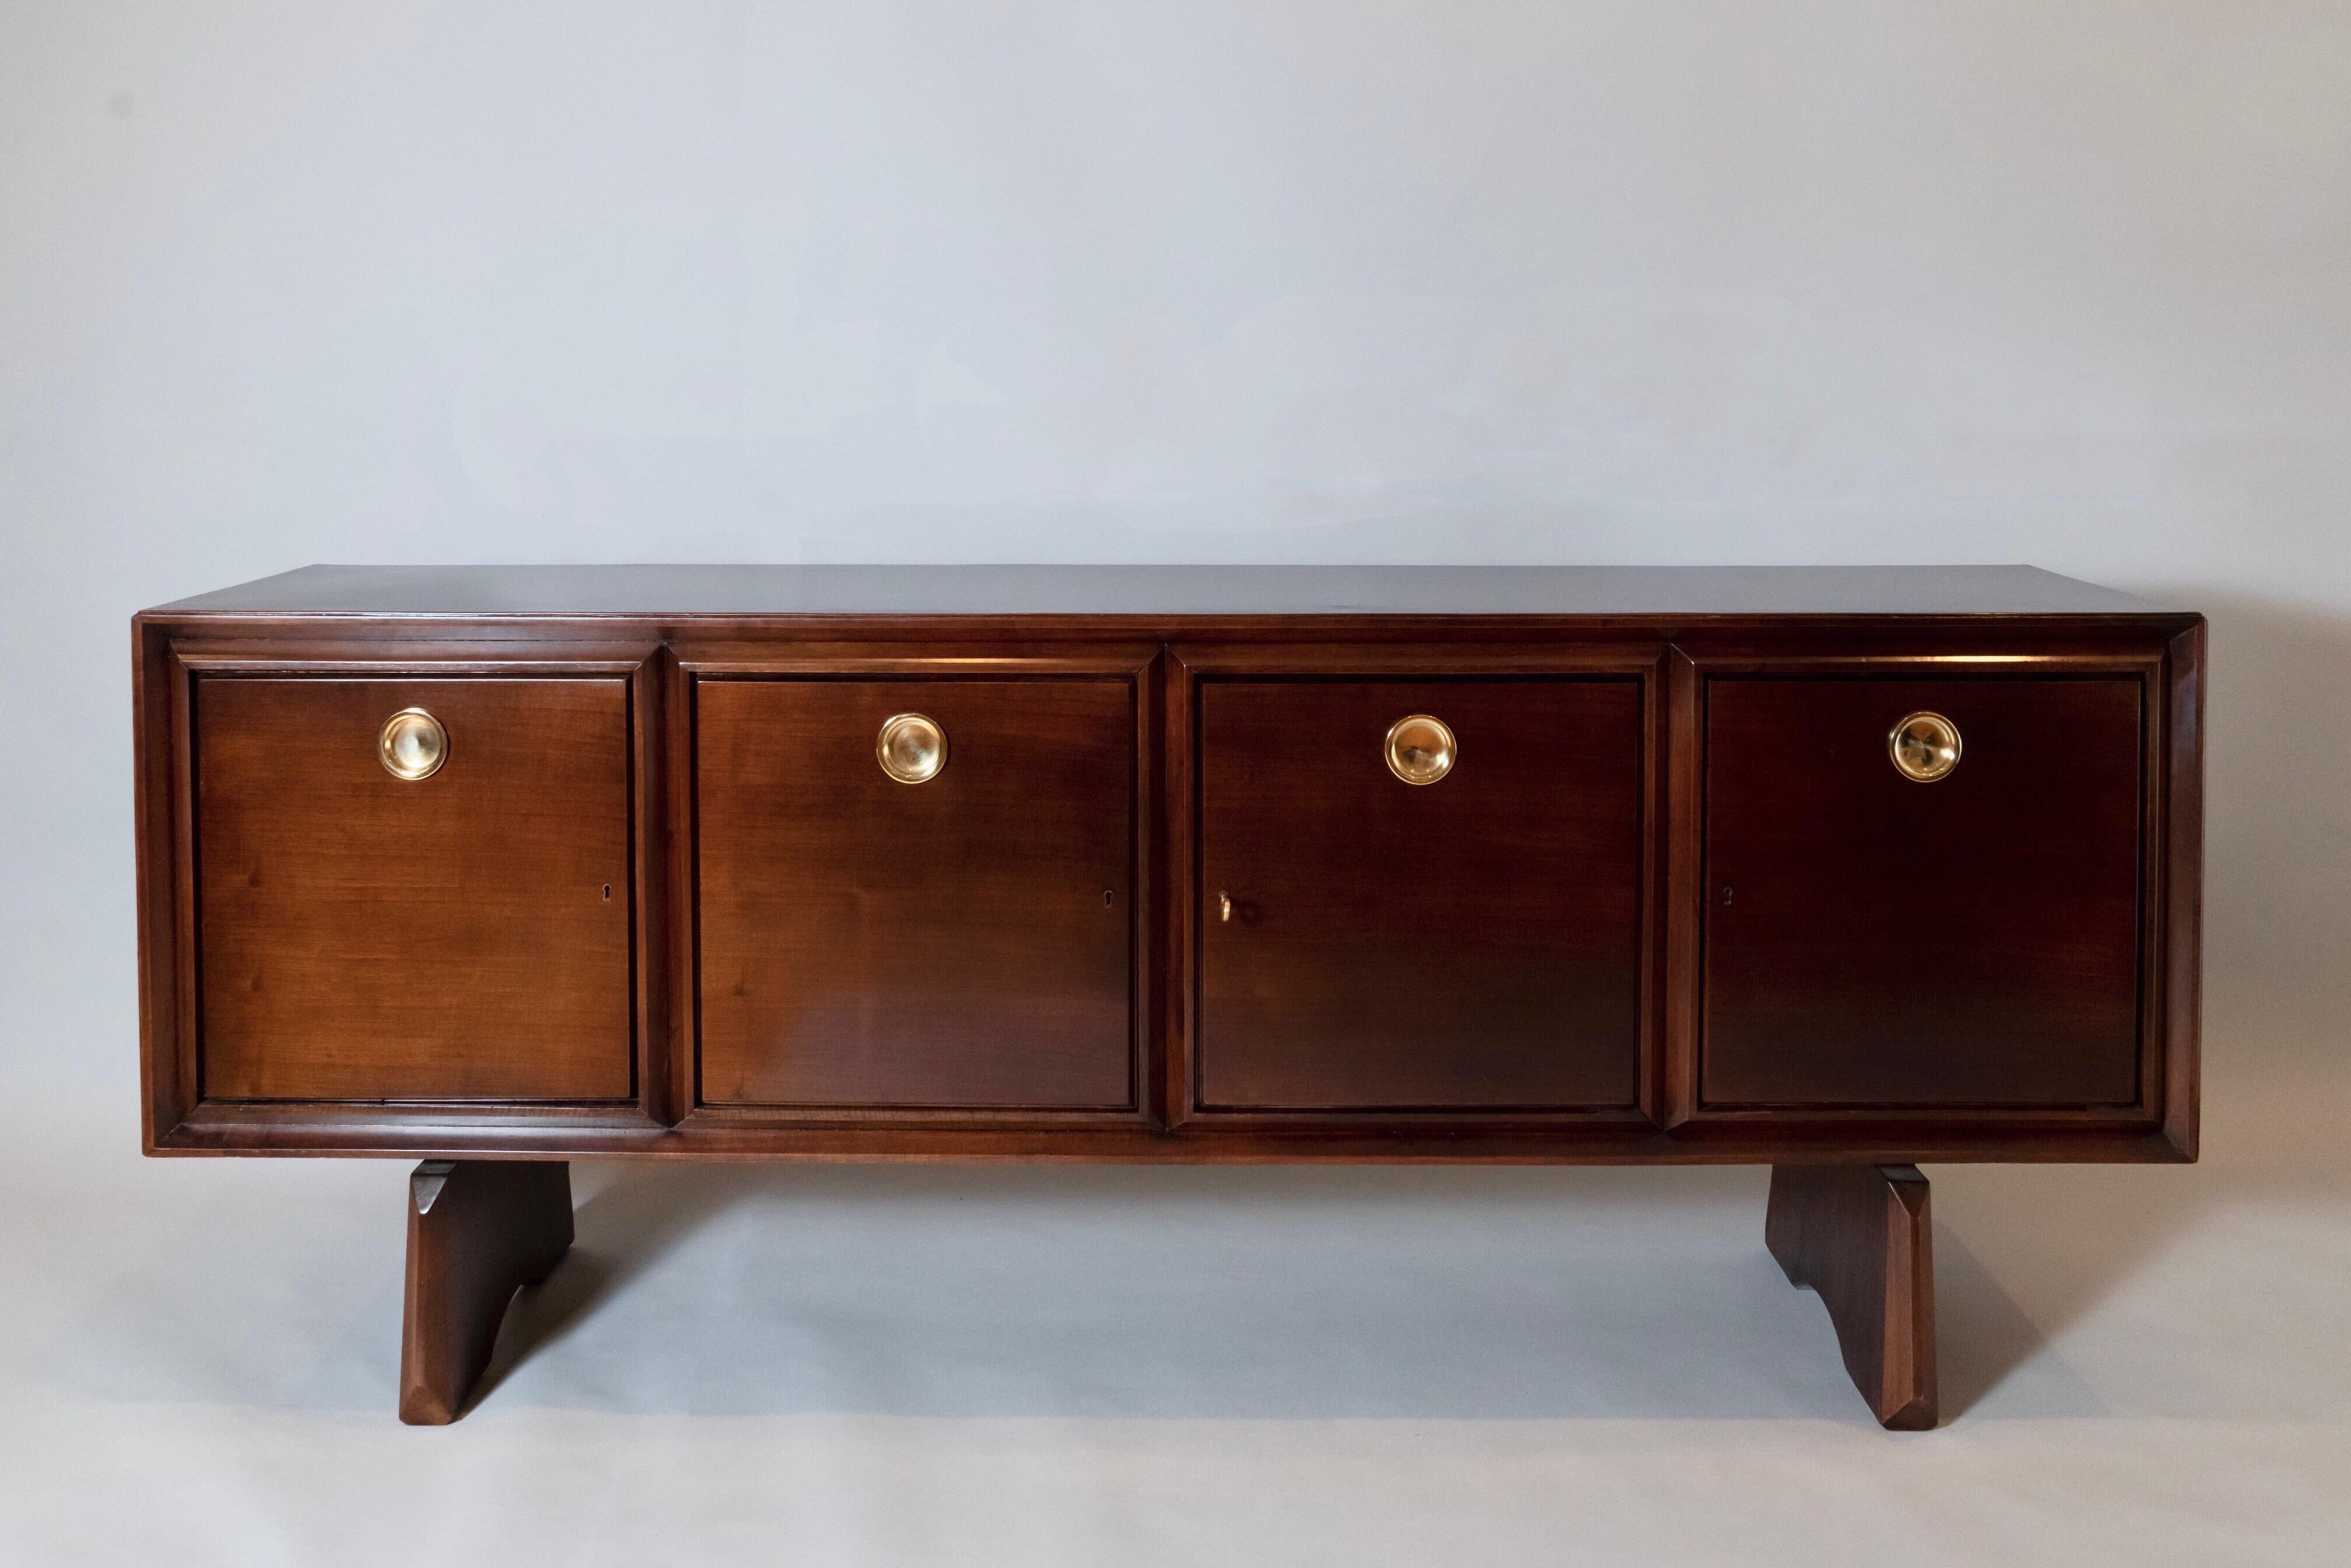 Paolo Buffa (1903 - 1970) 

A large and imposing sideboard by Milanese architect and designer Paolo Buffa, in walnut with round mirror-polished brass handles. The buffet's long, rectilinear body is incised with a sculpted, haut-relief double frame